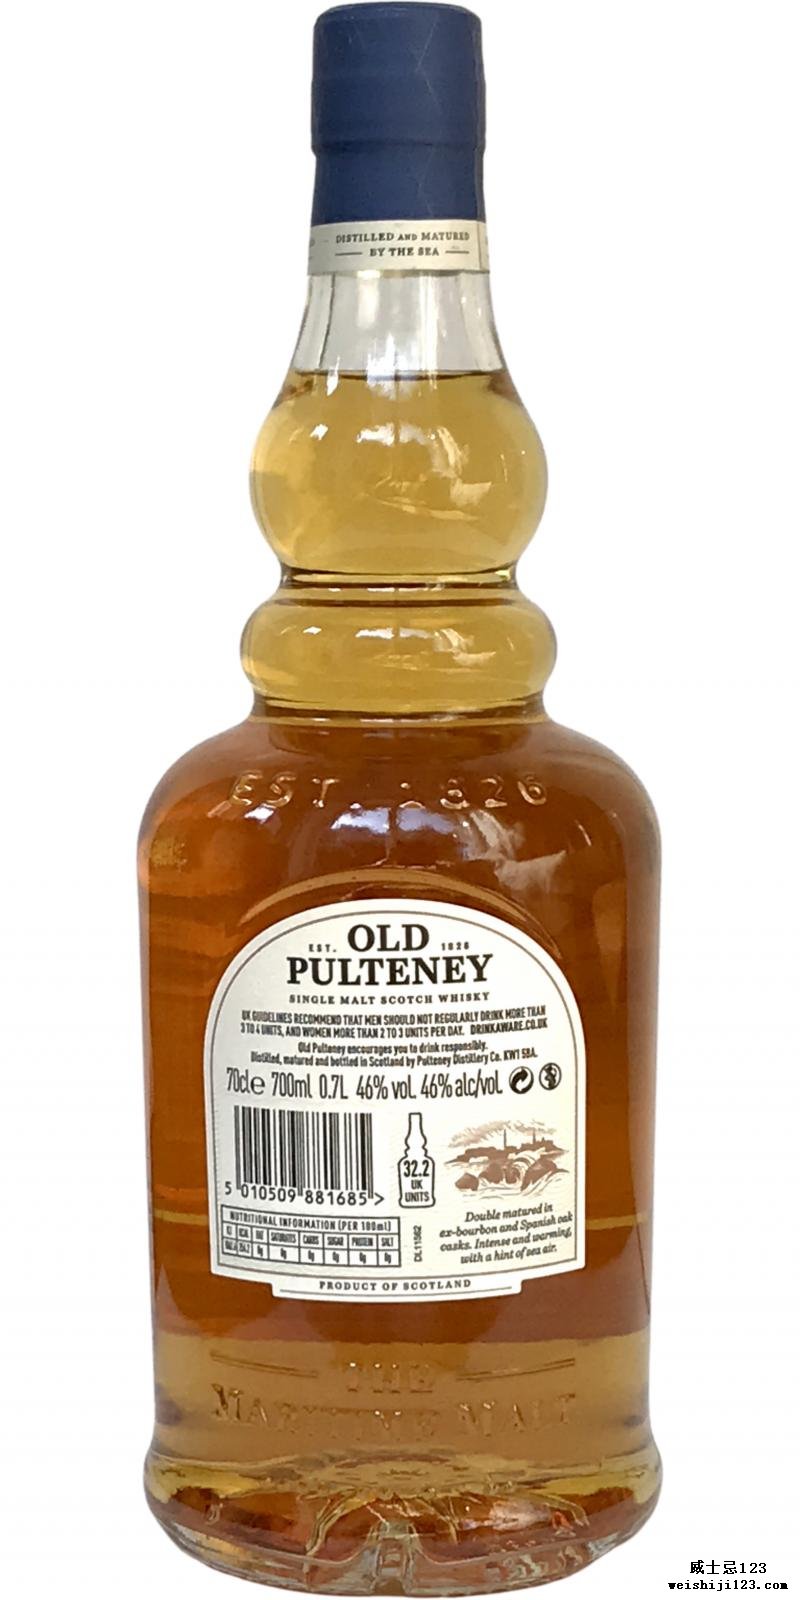 Old Pulteney 18-year-old